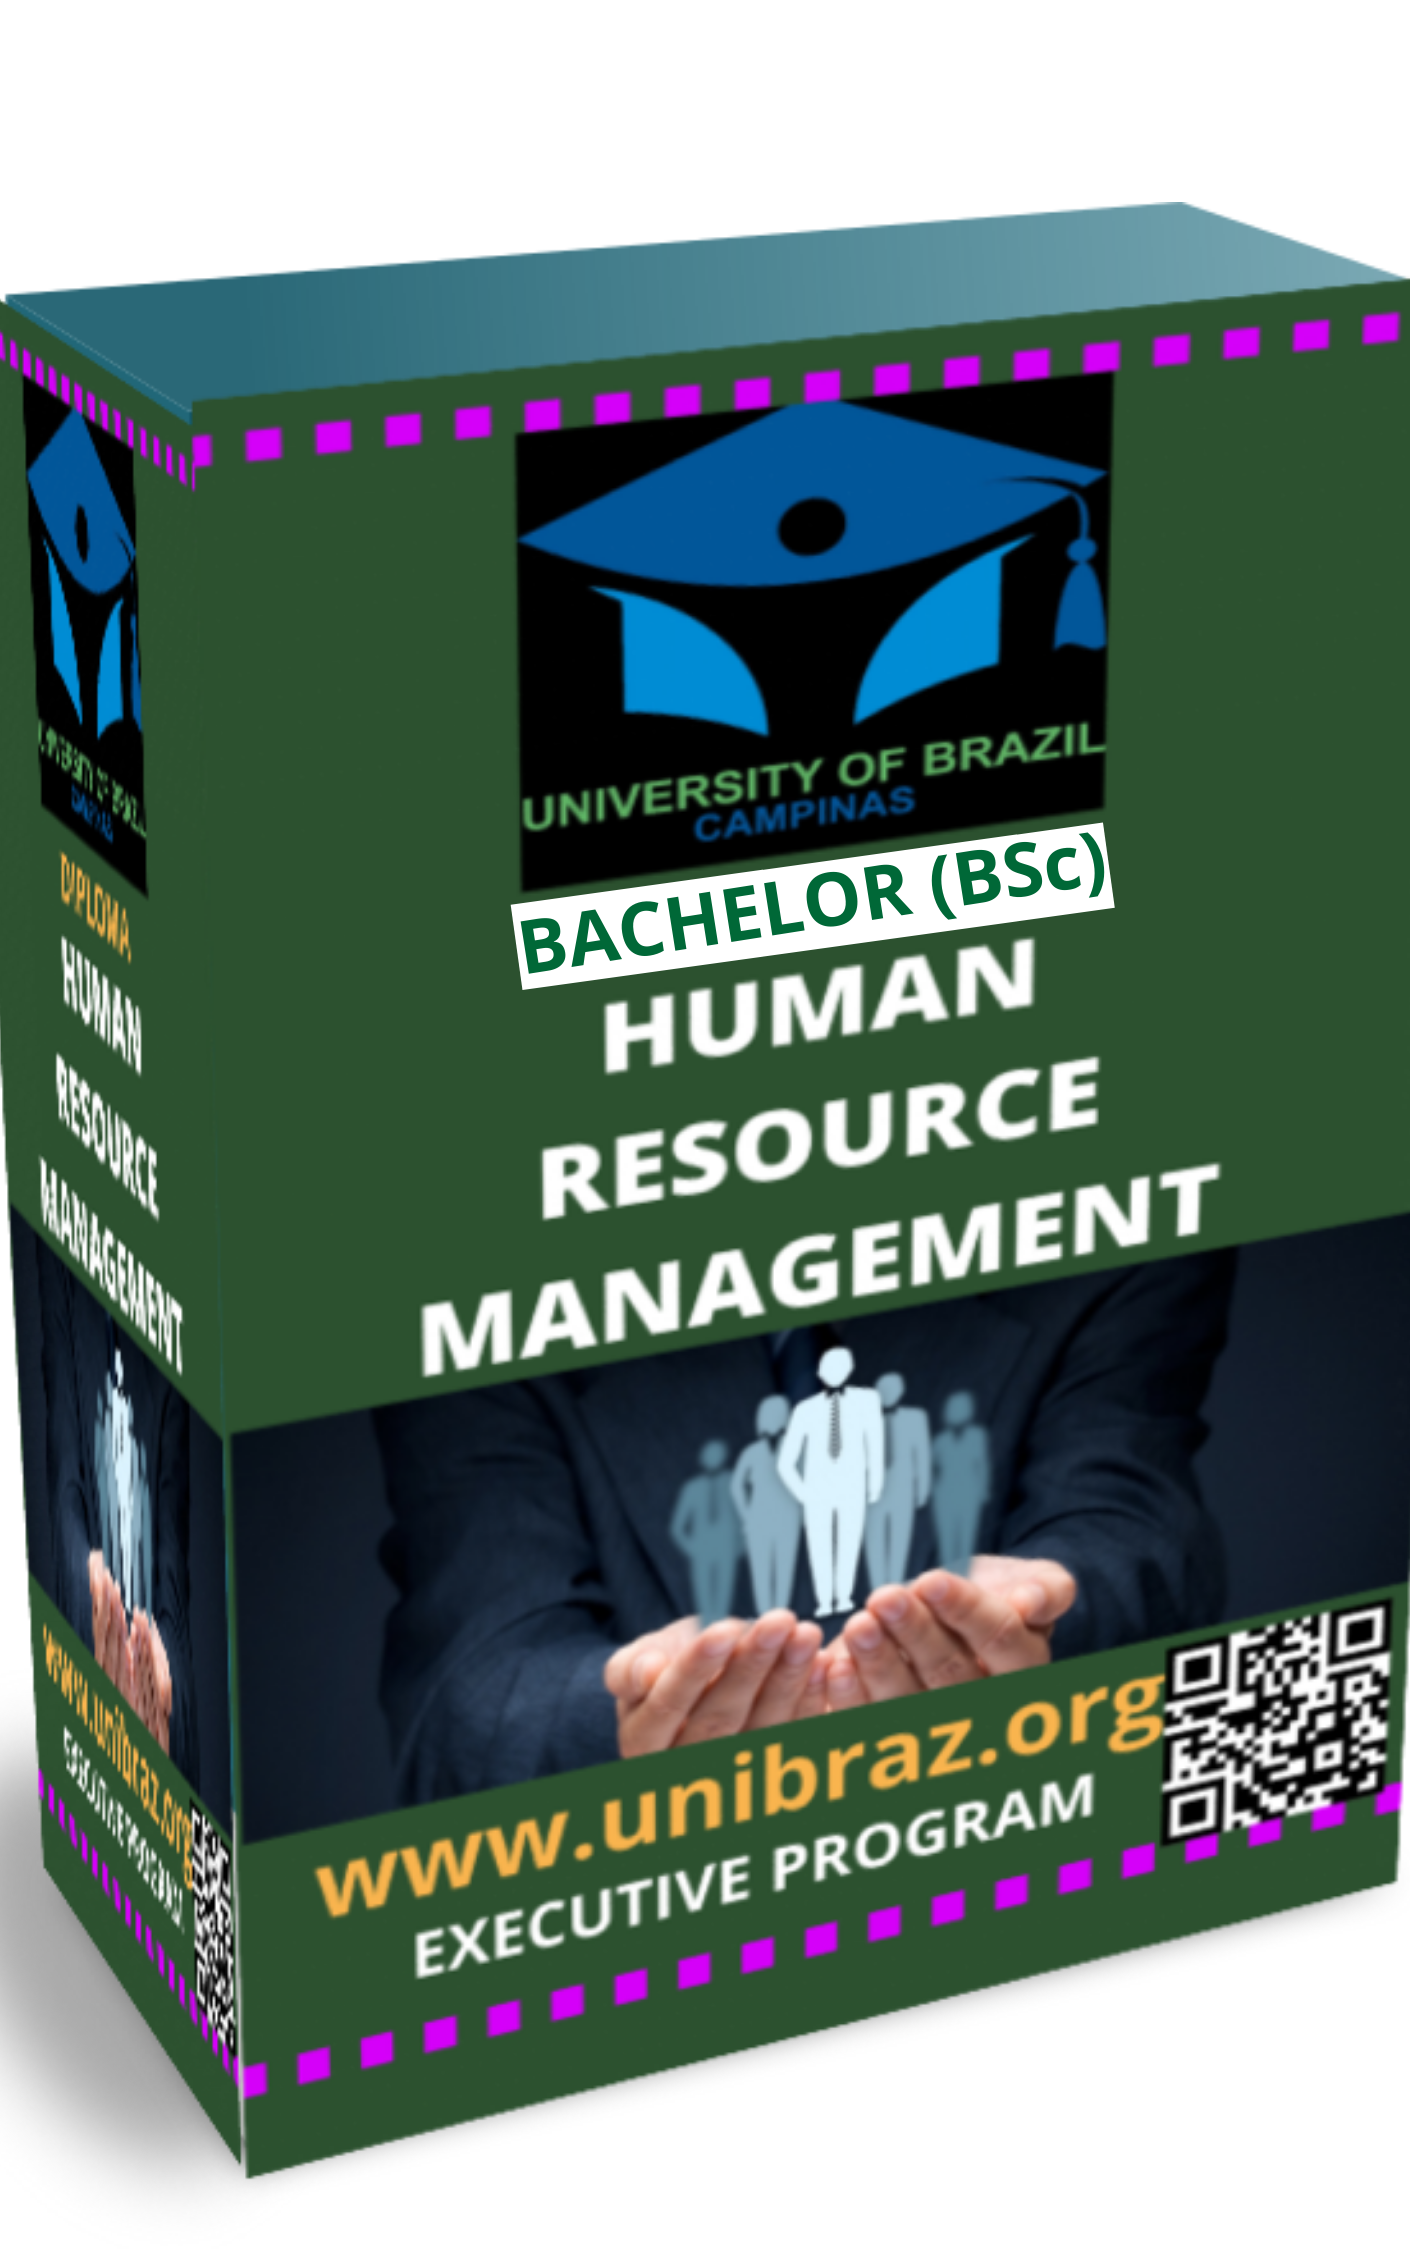 BACHELOR OF SCIENCE (BSc.) HUMAN RESOURCE MANAGEMENT